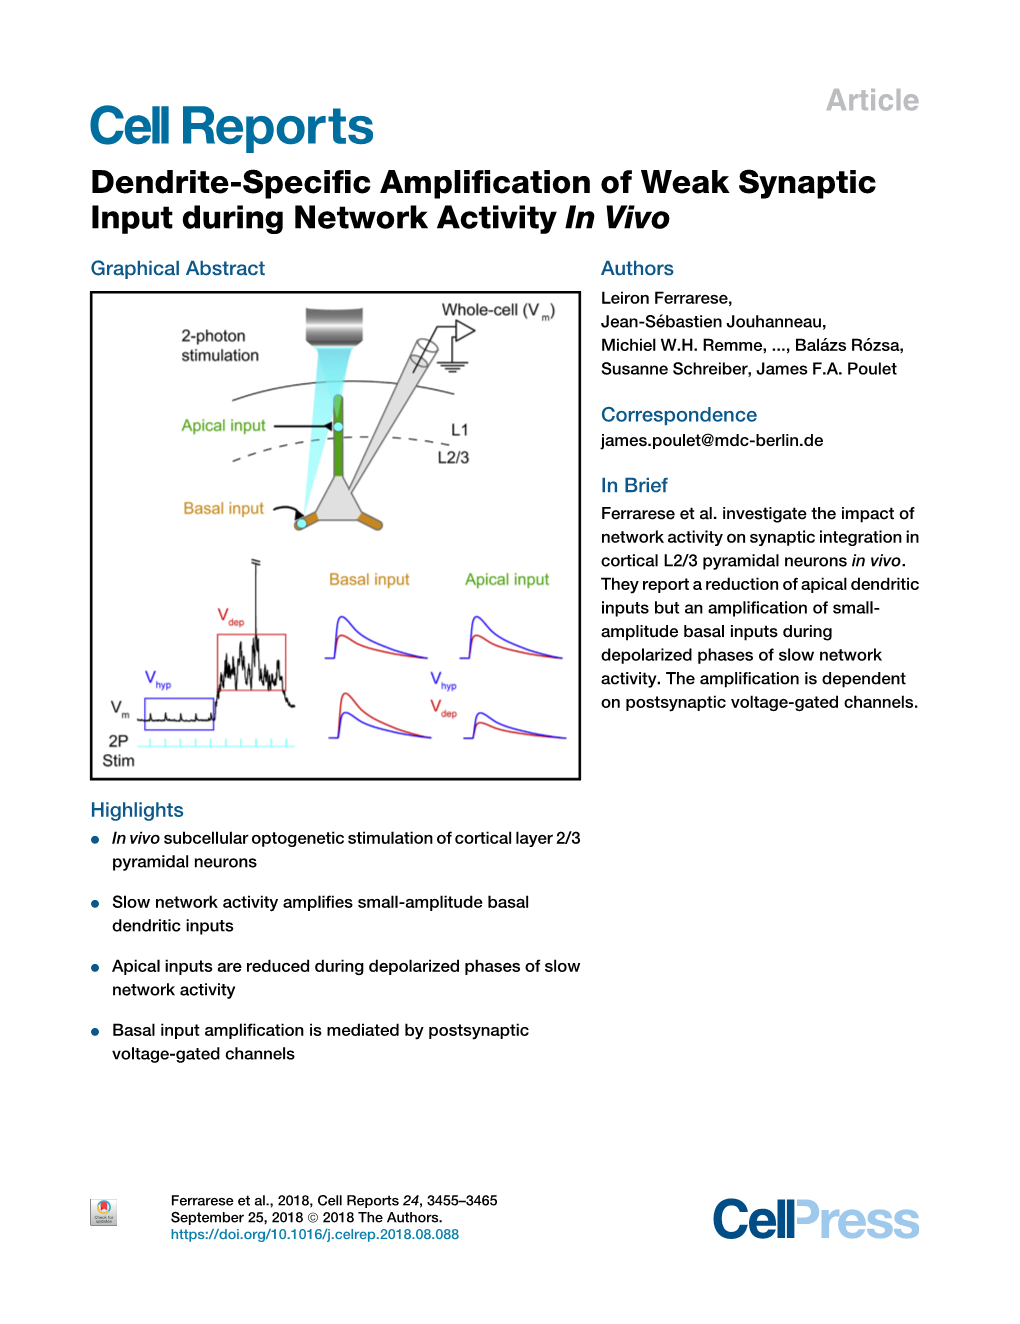 Dendrite-Specific Amplification of Weak Synaptic Input During